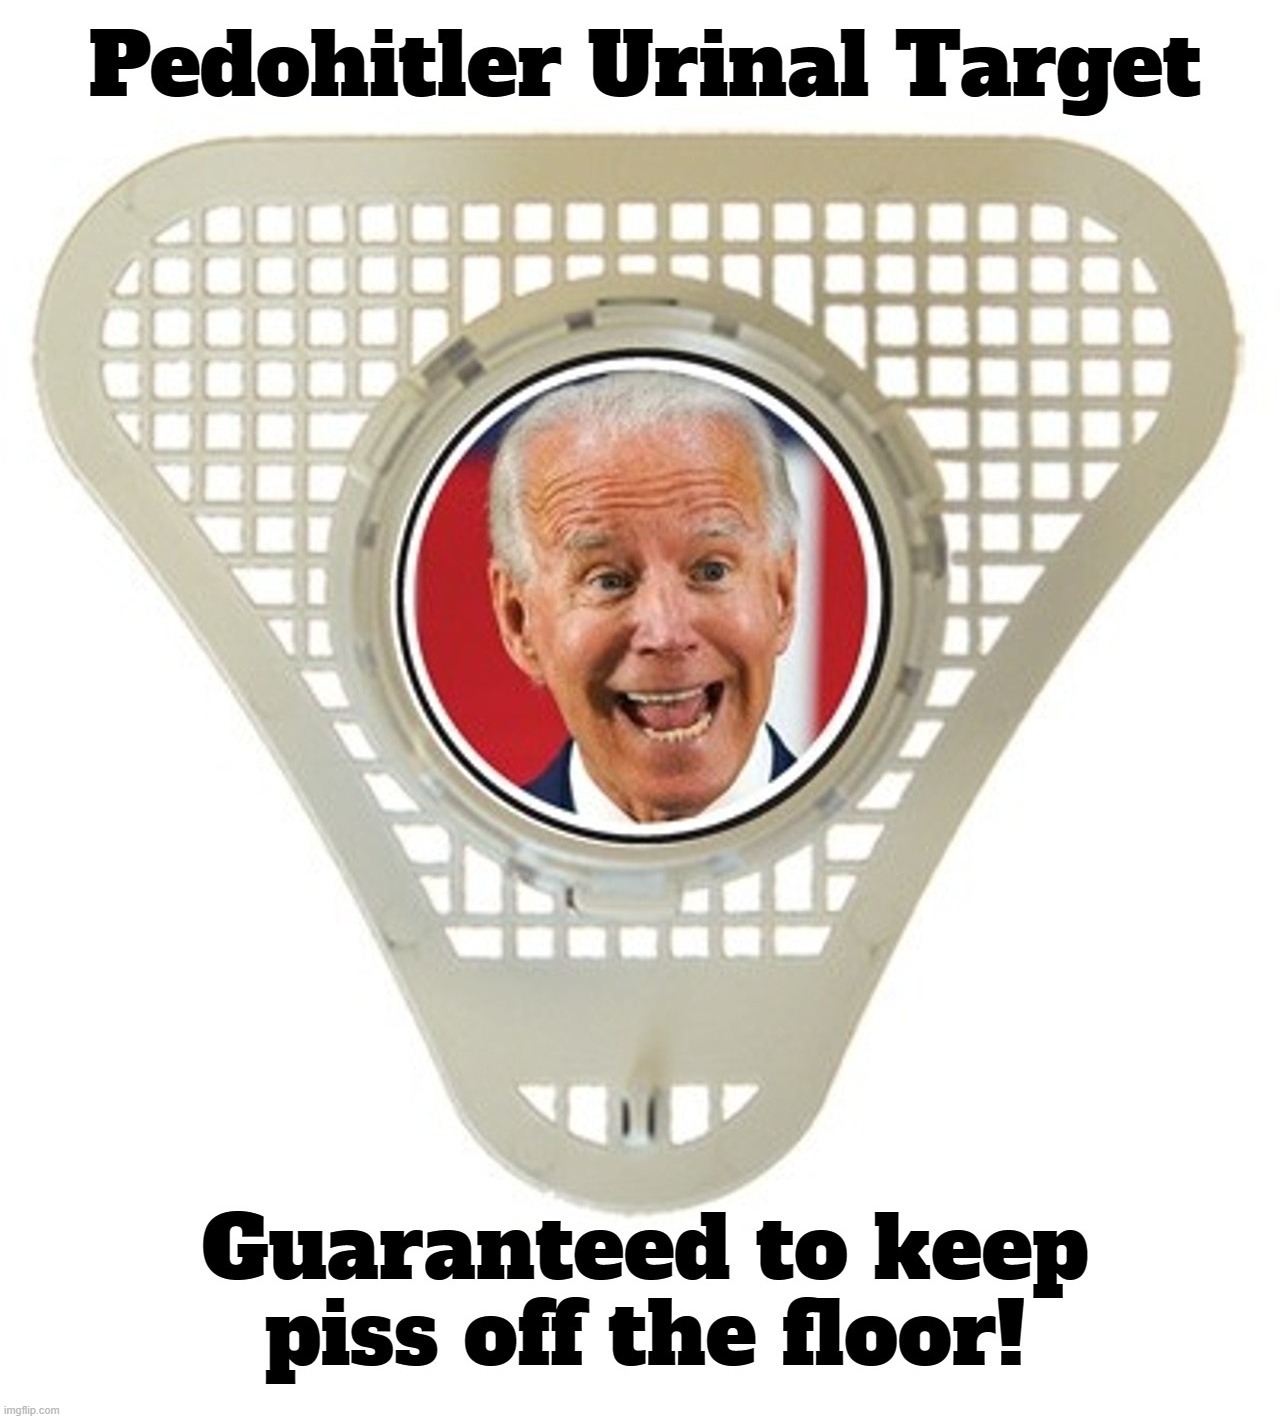 Pedohitler Urinal Target | image tagged in pedohitler,urinal guy,target practice,target,urinal guy more text room,piss on you | made w/ Imgflip meme maker